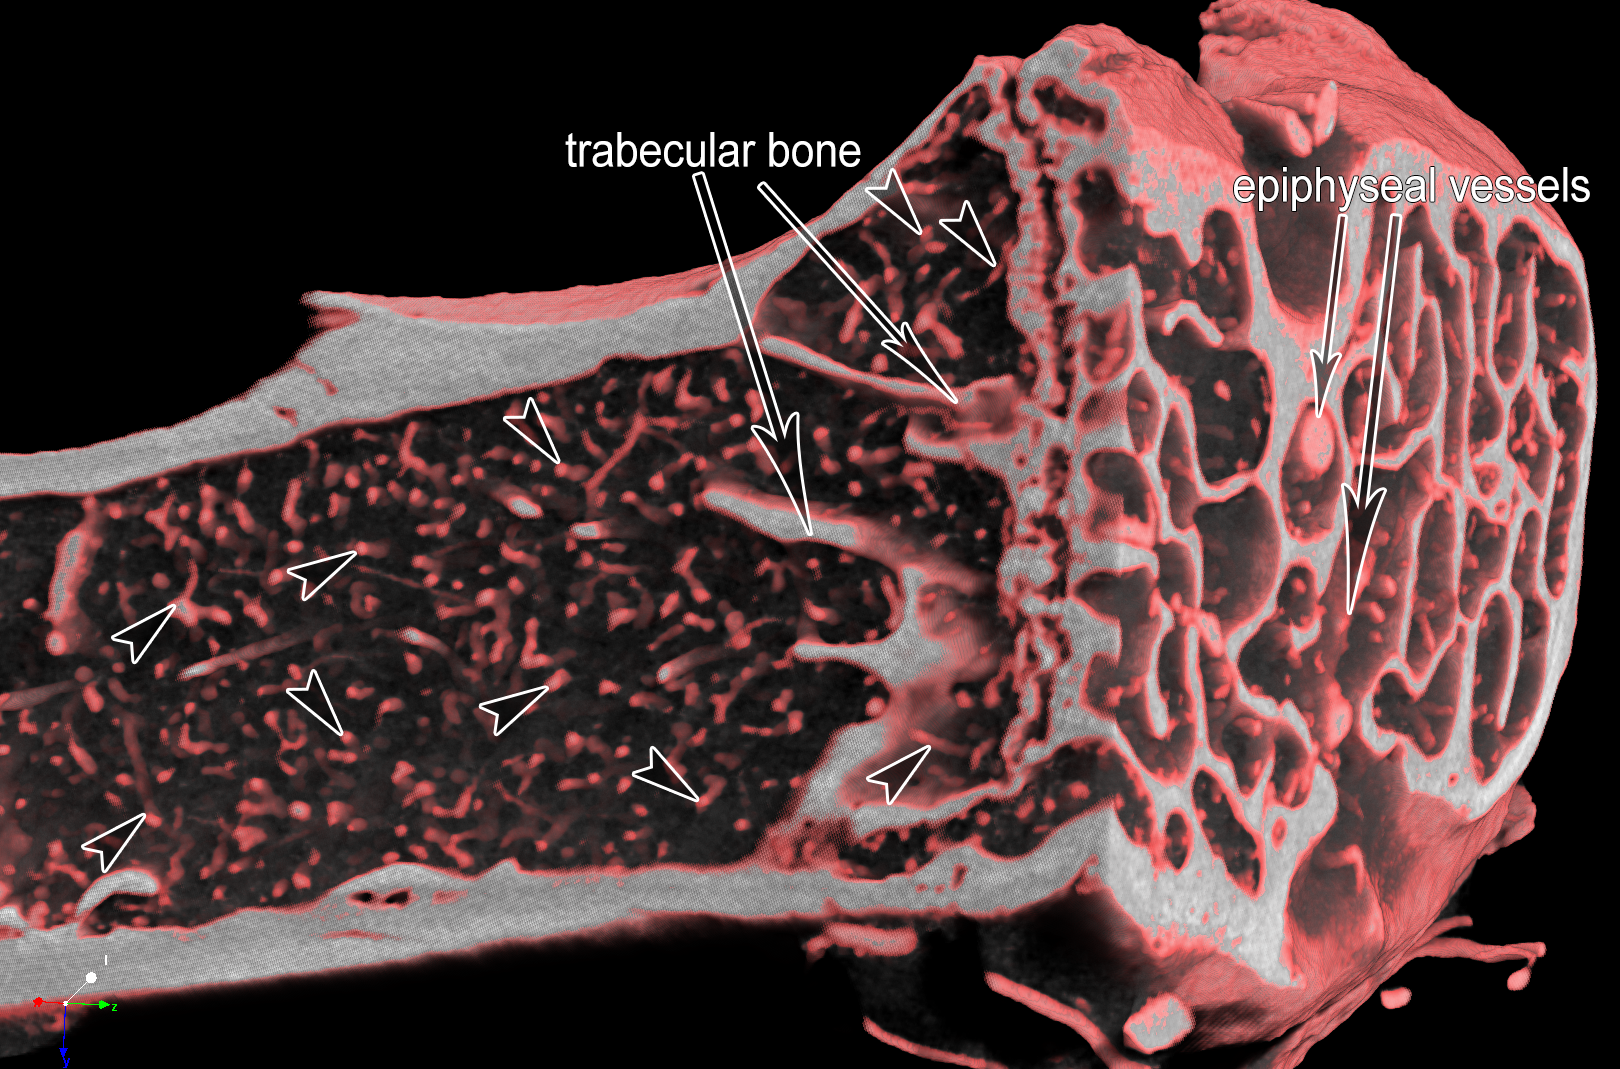 Figure 1: microangioCT of proximal murine tibia of a 21-month-old VEGF transgenic male mouse. After perfusion with µAngiofil the murine tibia was harvested, fixated in 4% PFA and imaged by microCT. Arrowheads mark microvessels within the tibia. The diameter of the tibia shaft is around 1 mm. On the right side of the image one can distinguish the bigger epiphyseal vessels. The bone tissue appears white at the plane of the virtual section through the microCT-dataset.